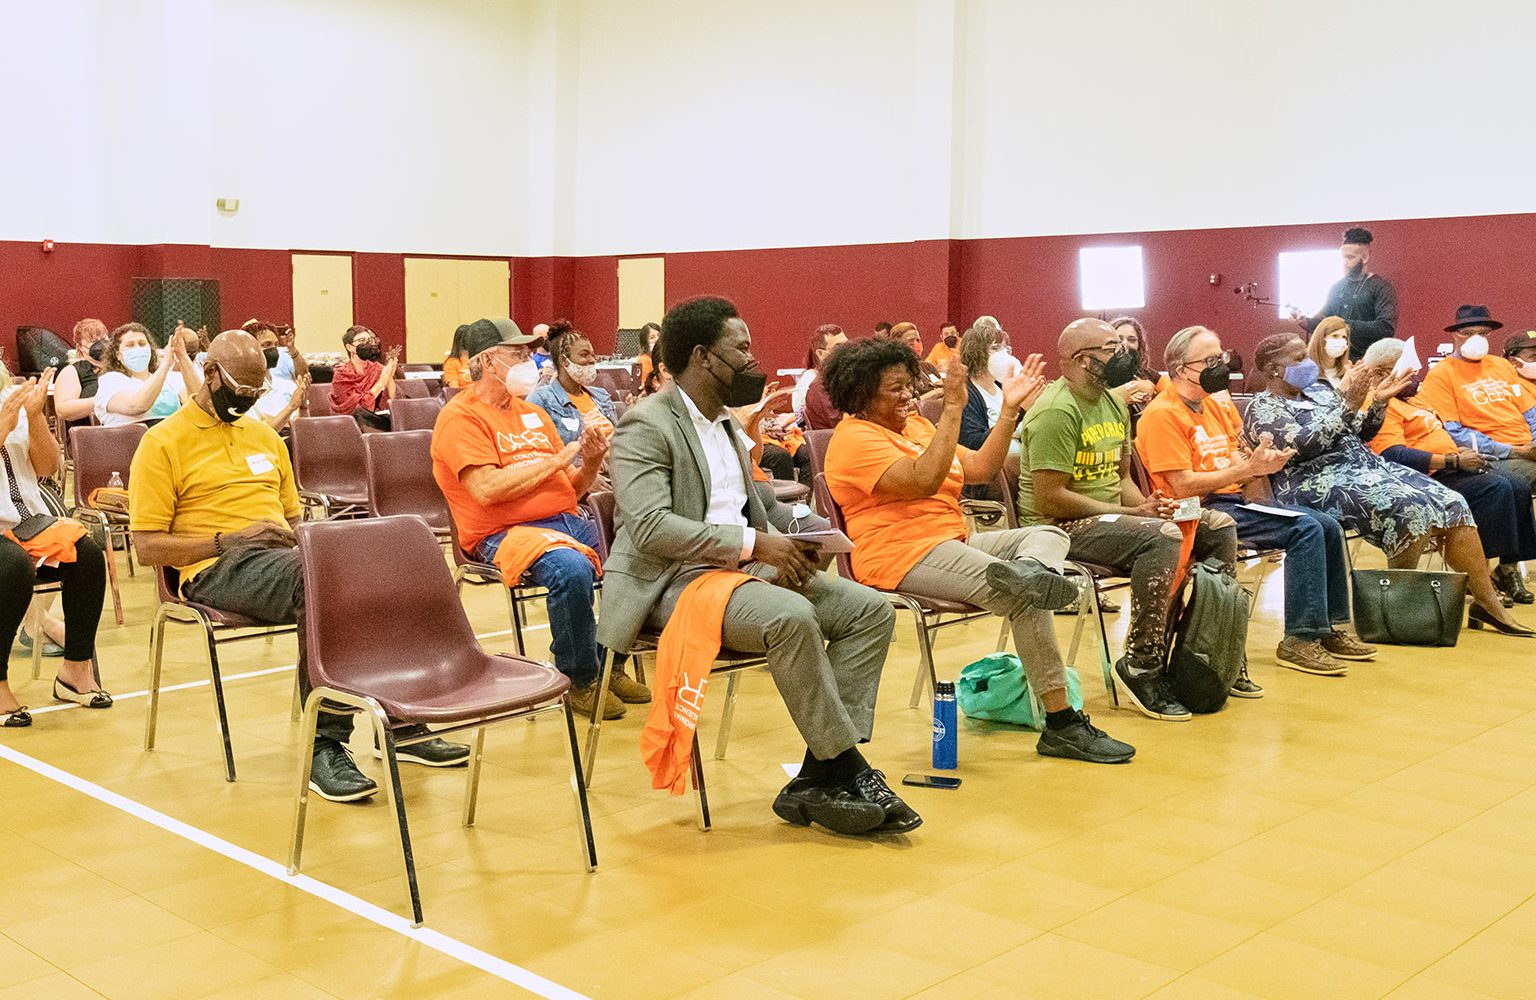 Attendees applaud speakers during the Coalition for Environment, Equity, and Resilience’s People’s Hearing event at the Carl Walker, Jr. Multi Service Center in Houston, Texas April 30, 2022. The hearing gave community members an opportunity to voice the health and environmental hardships their neighborhoods face to the Texas Commission on Environmental Quality.